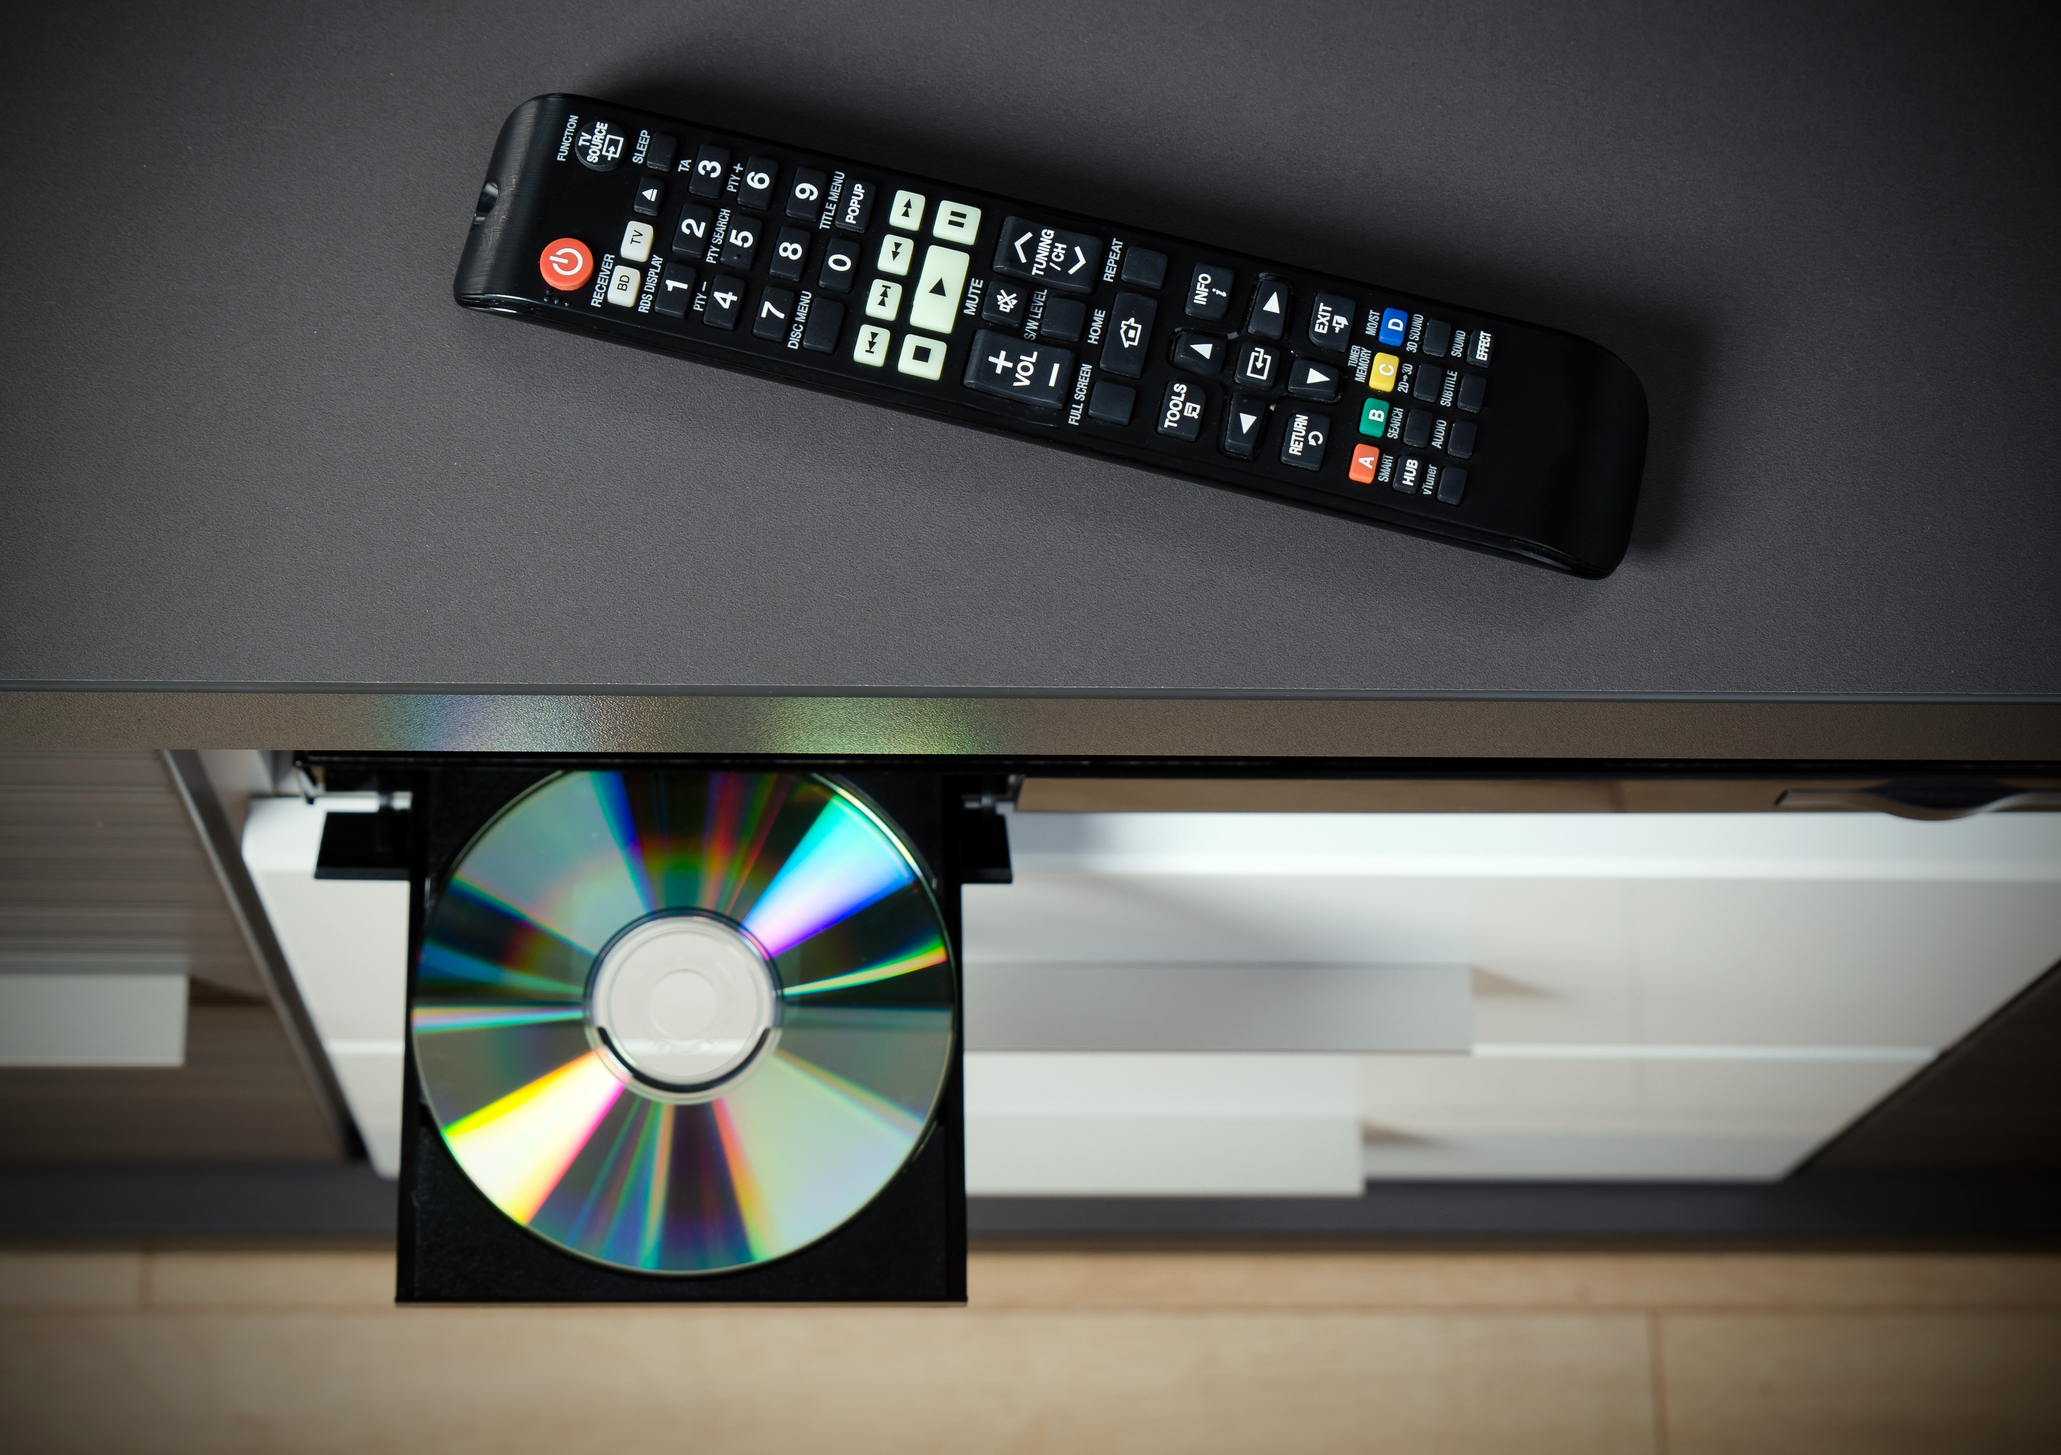 How to Program a Dish Remote to Control a DVD Player | Techwalla